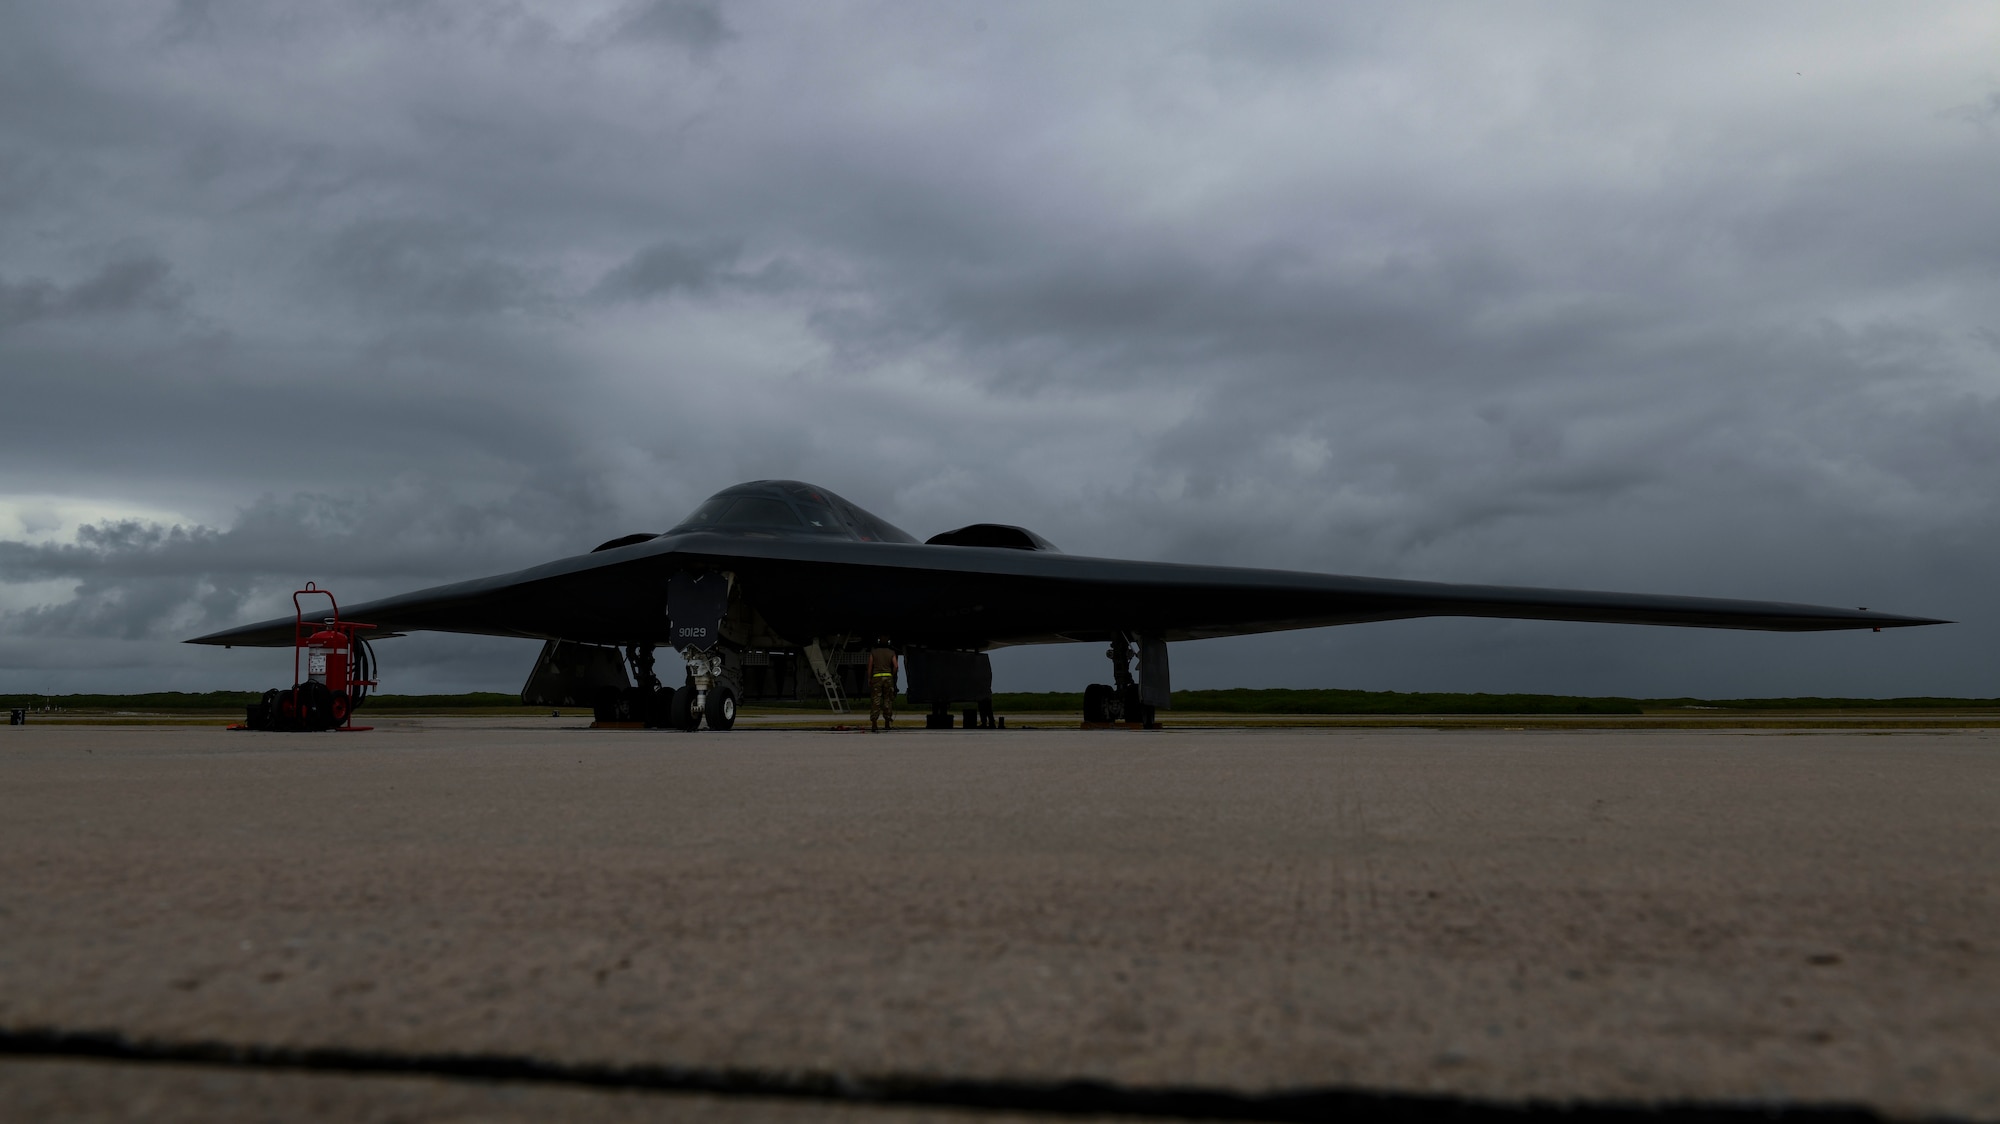 A B-2 Spirit Stealth Bomber arrives at Naval Support Facility Diego Garcia, Aug. 12, 2020. Three B-2 Spirits from Whiteman Air Force Base, Missouri, deployed to NSF Diego Garcia to support U.S. security commitments in the Indo-Pacific region. (U.S. Air Force photo by Tech. Sgt. Heather Salazar)